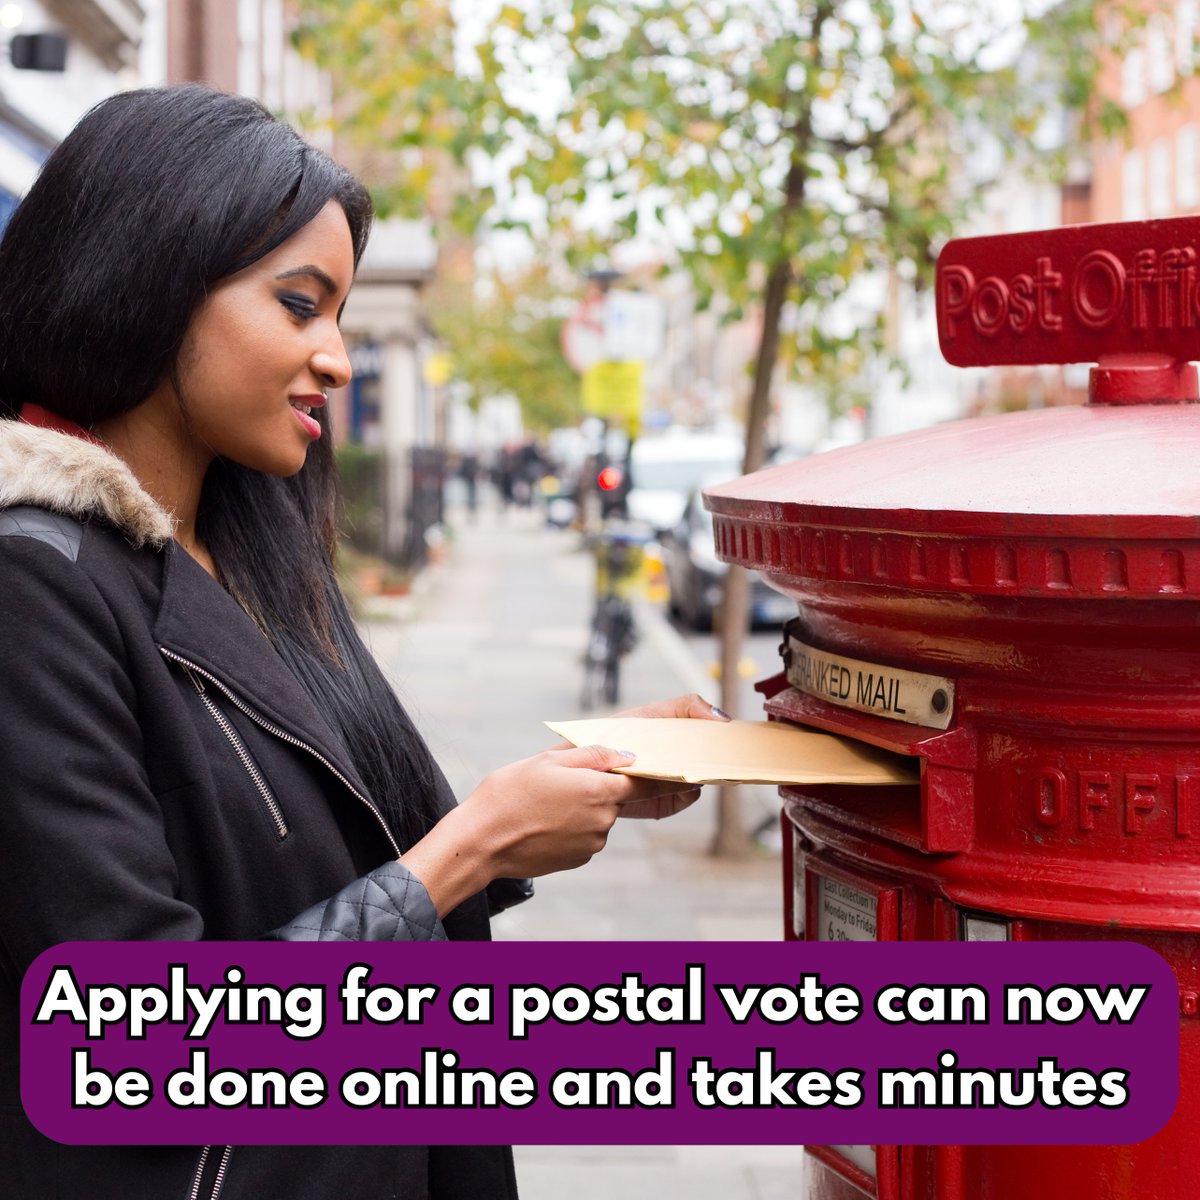 If you want to vote by post at the elections on 2 May, there is not long left to apply ✉️⏳ The deadline is 5pm today (17 April) and this applies to voting at the local elections, as well as the Police and Crime Commissioner election 🗳️👮 Apply ➡️ gov.uk/apply-postal-v…